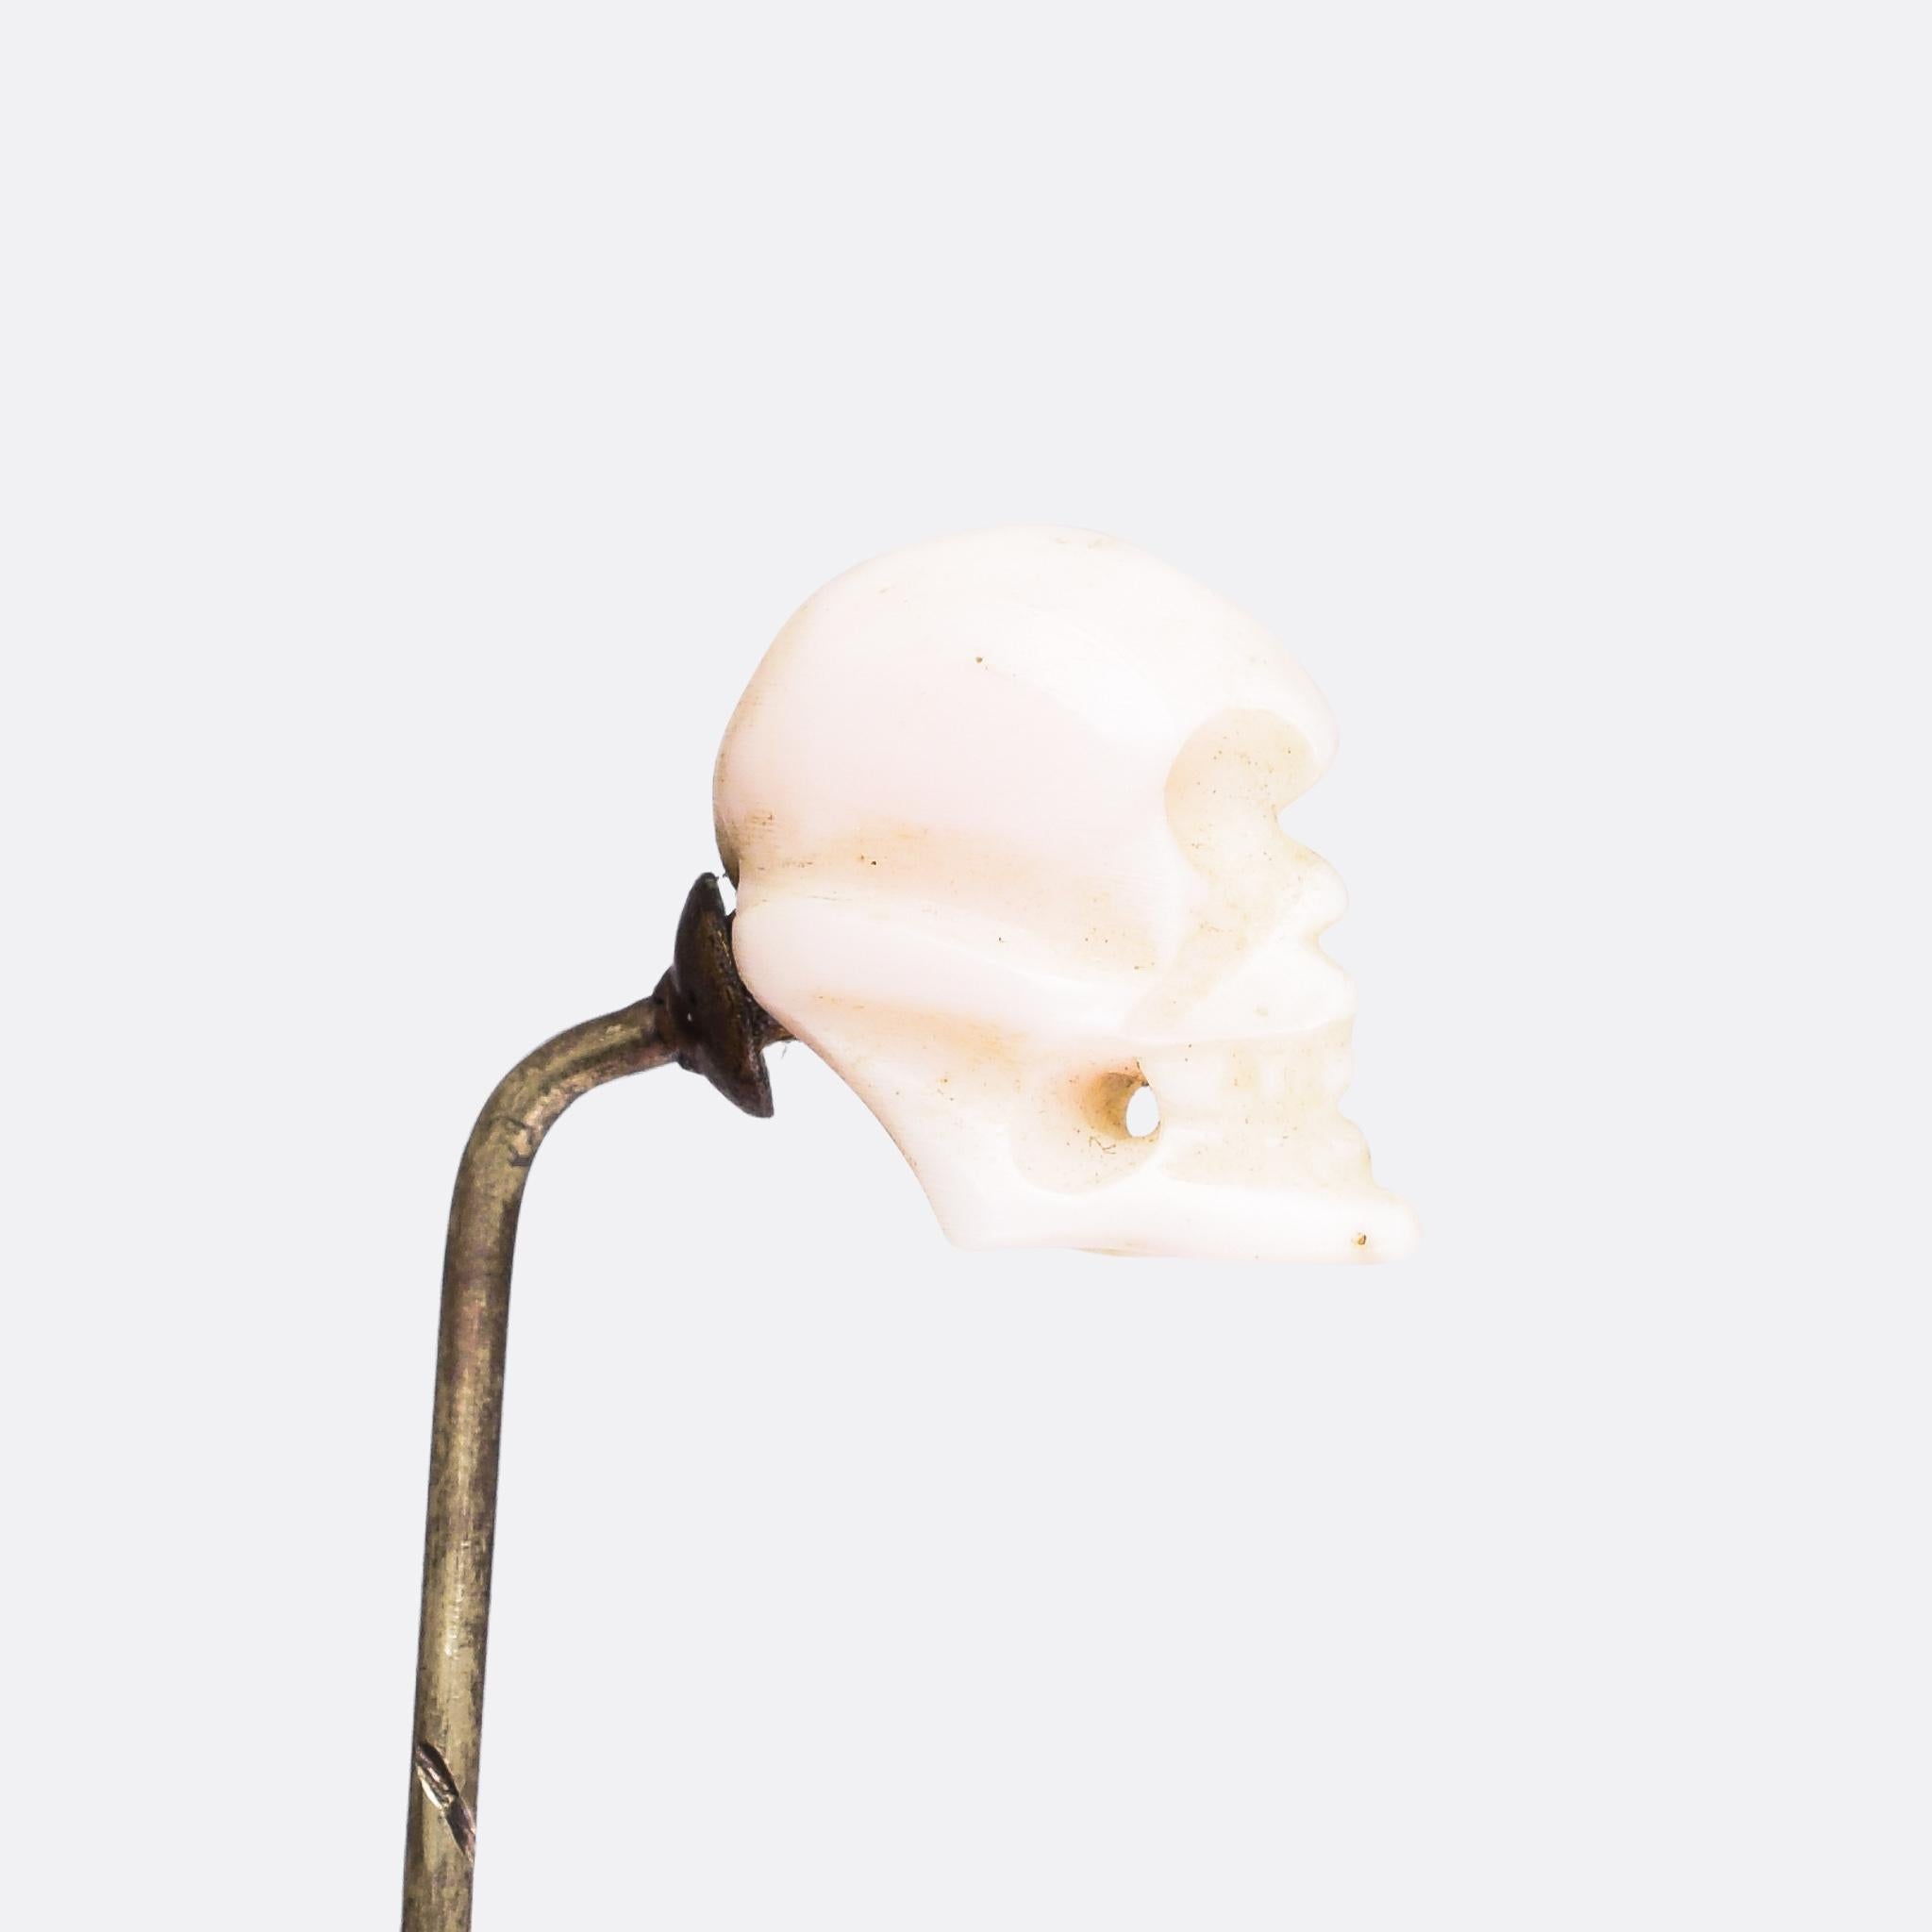 A cool antique stick pin featuring a carved coral skull. It dates from the Victorian era, circa 1880, and remains in excellent condition. The features of the skull are ever-so-slightly exaggerated, giving it an almost cartoon-like